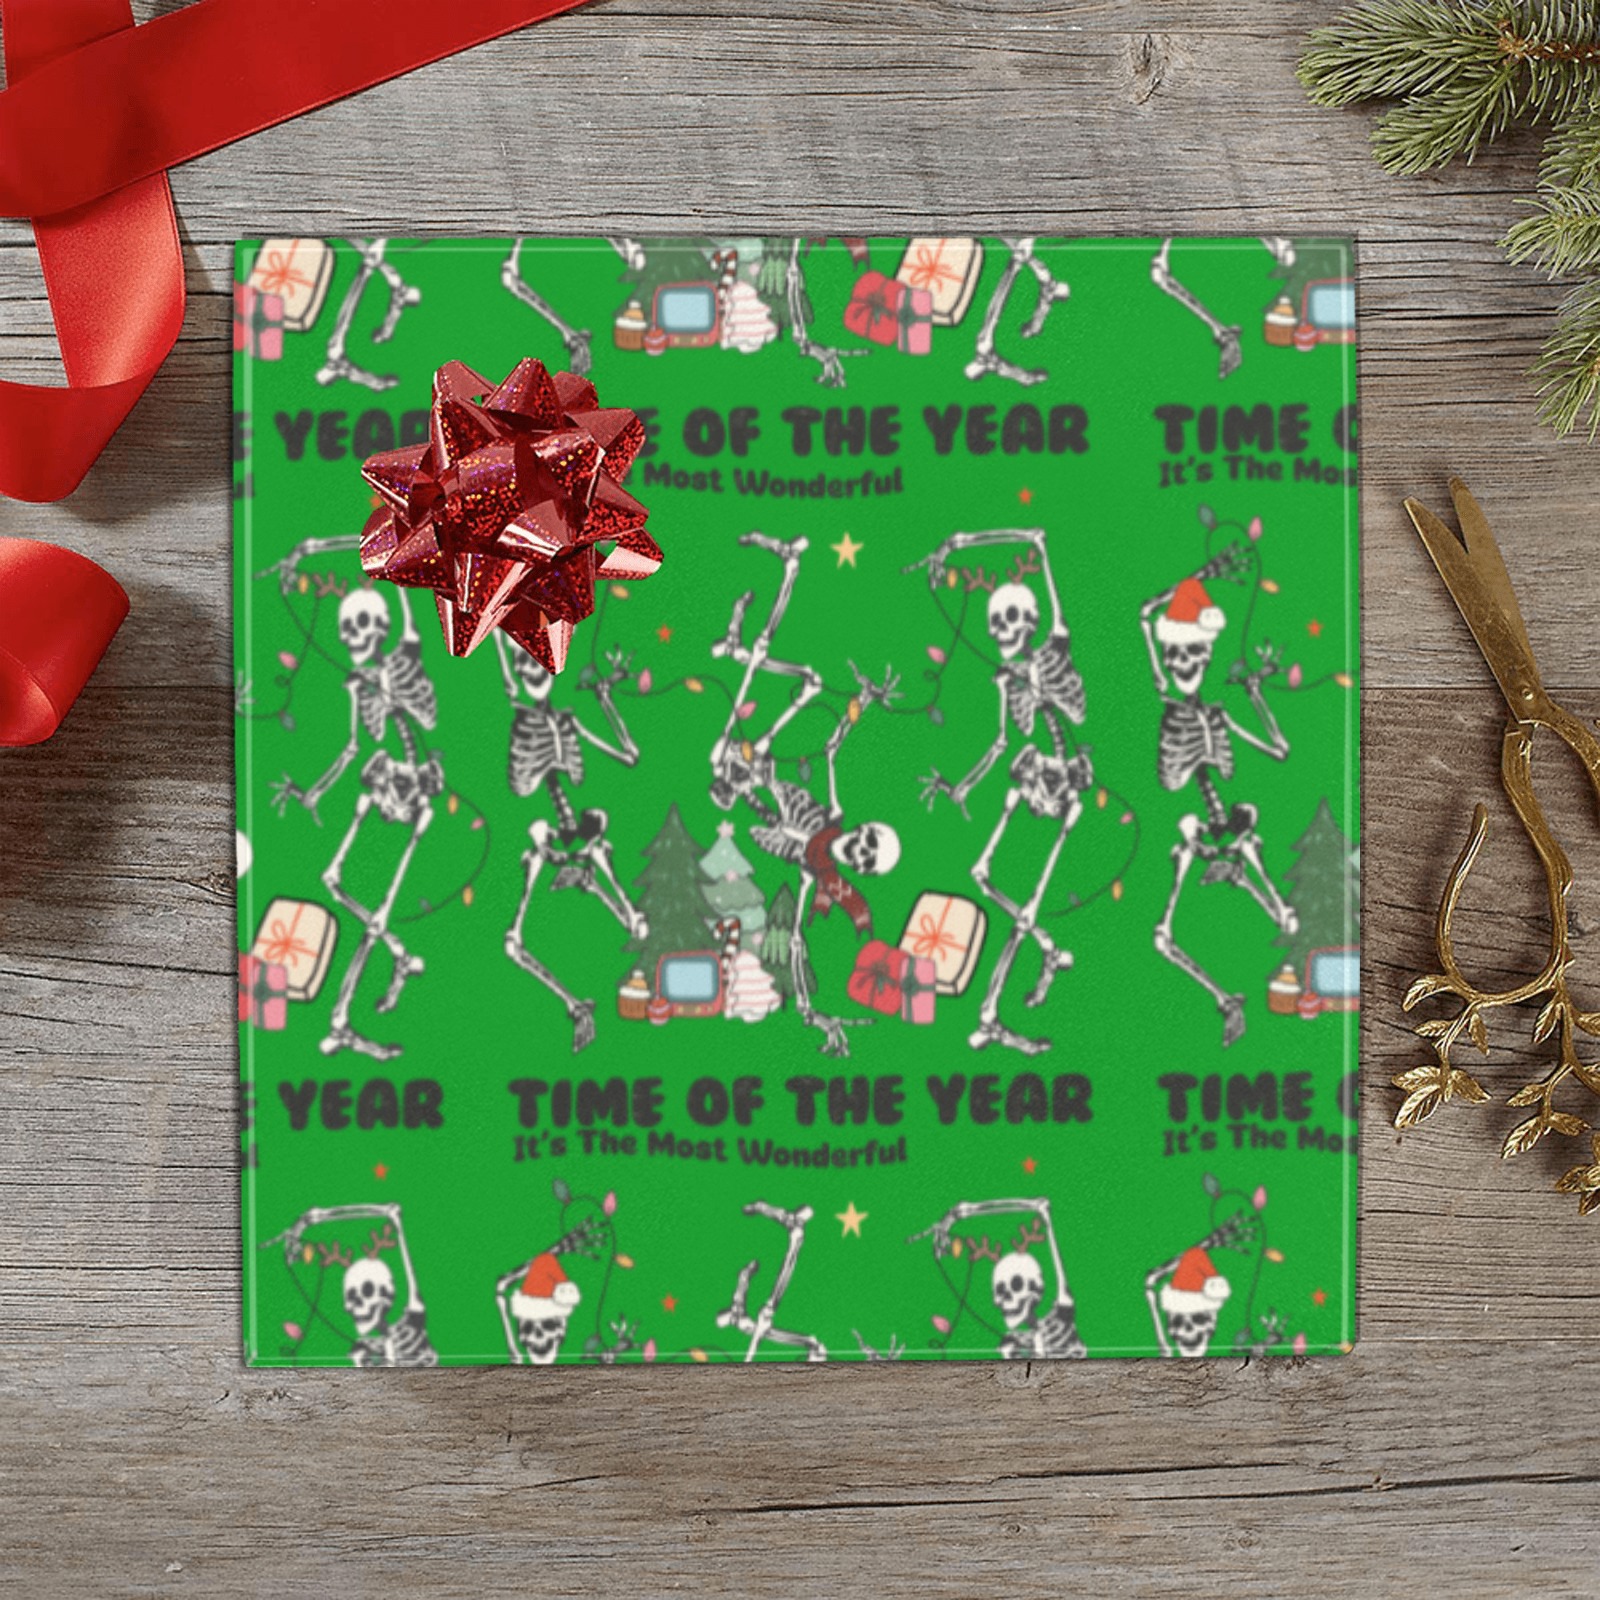 Most Wonderful Time Of The Year Skeletons (G) Gift Wrapping Paper 58"x 23" (4 Rolls)